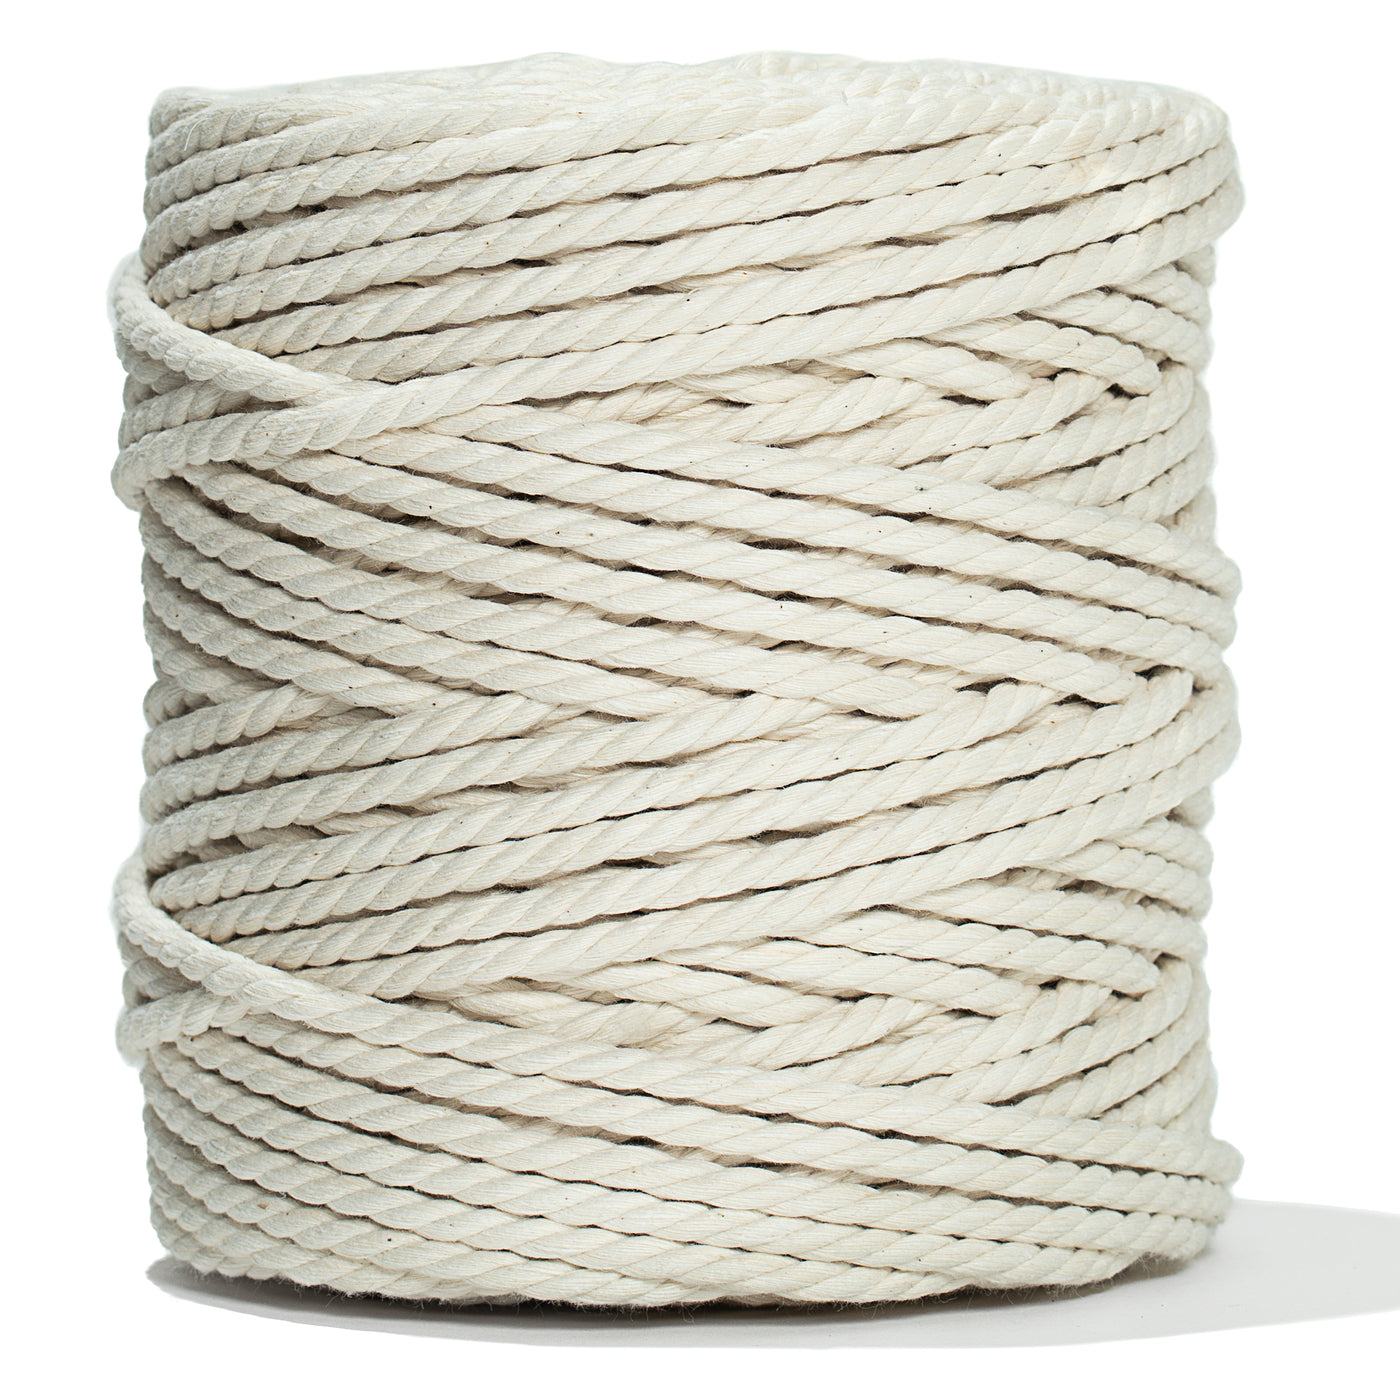 EXTRA LONG COTTON ROPE ZERO WASTE 5 MM - 3 PLY - NATURAL COLOR